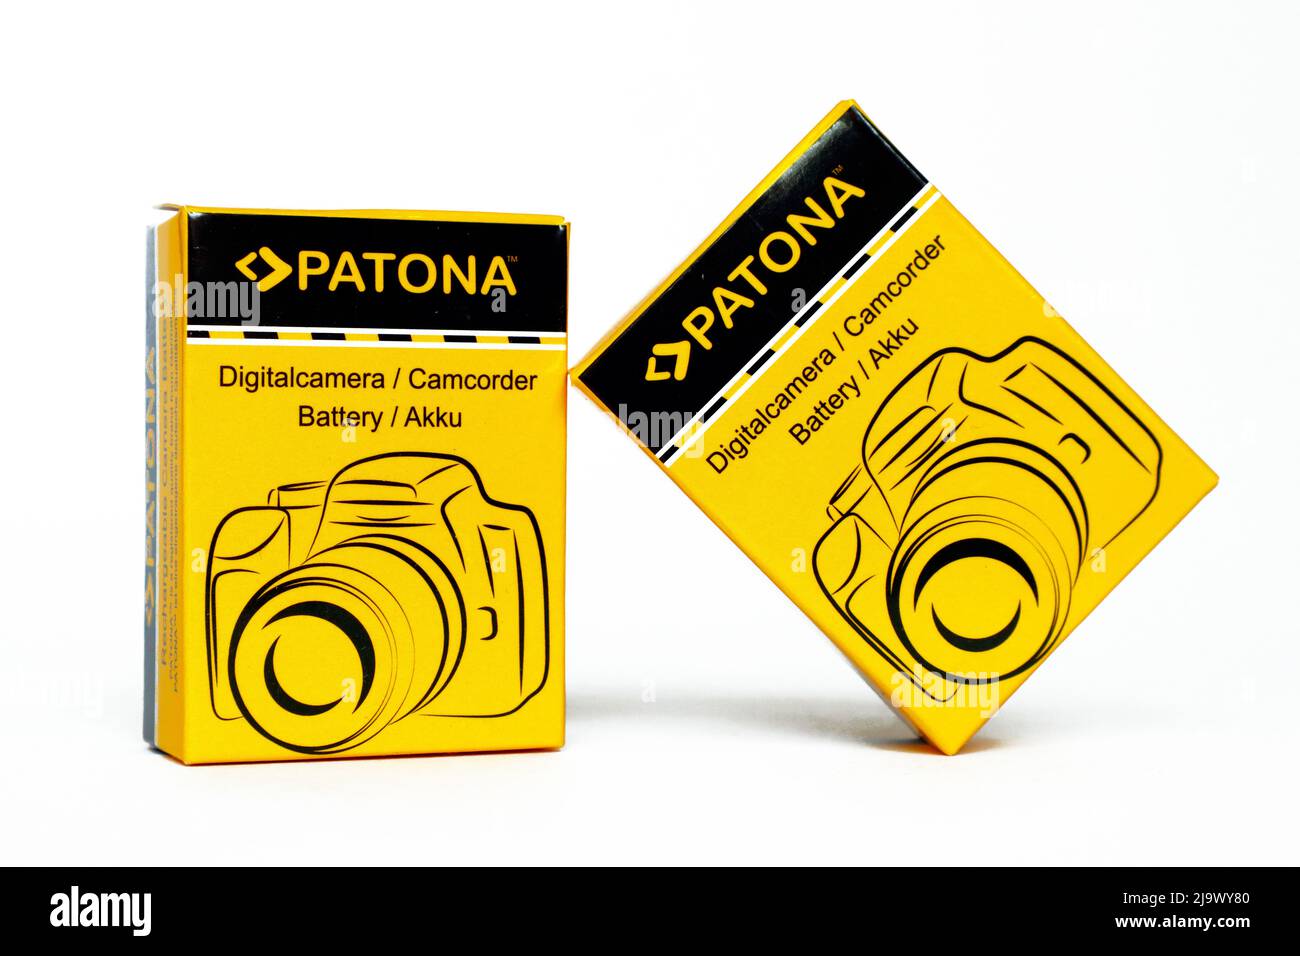 Patona rechargeable digital camera battery. Patona is a registered quality  brand from Germany Stock Photo - Alamy